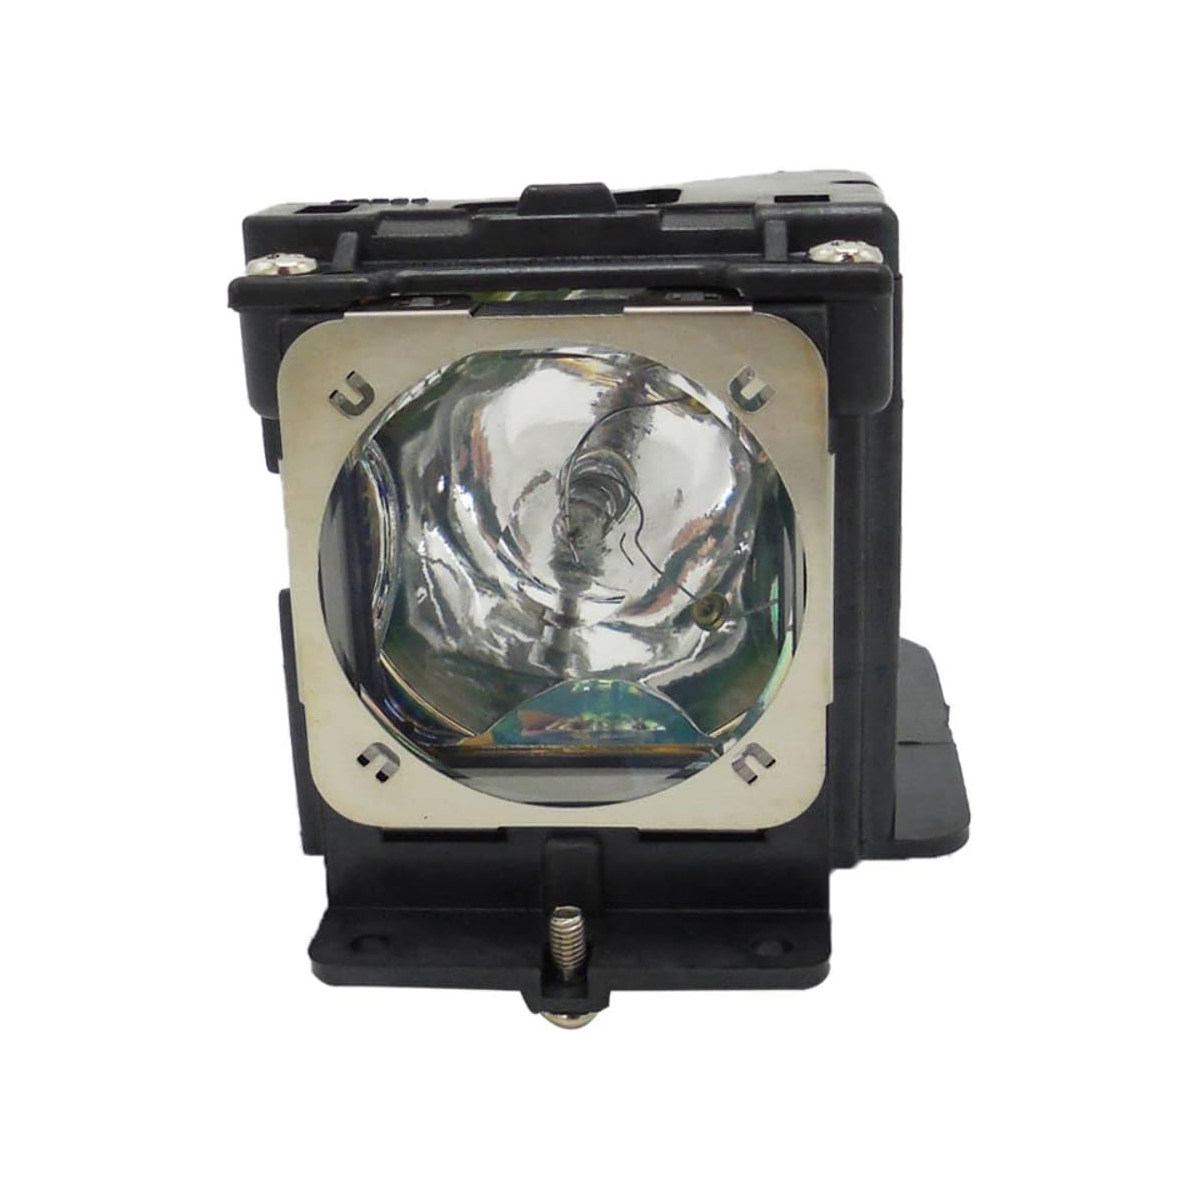 Replacement Projector lamp POA-LMP115 For Sanyo PLC-XU75 PLC-XU78 PLC-XU88 PLC-XU88W